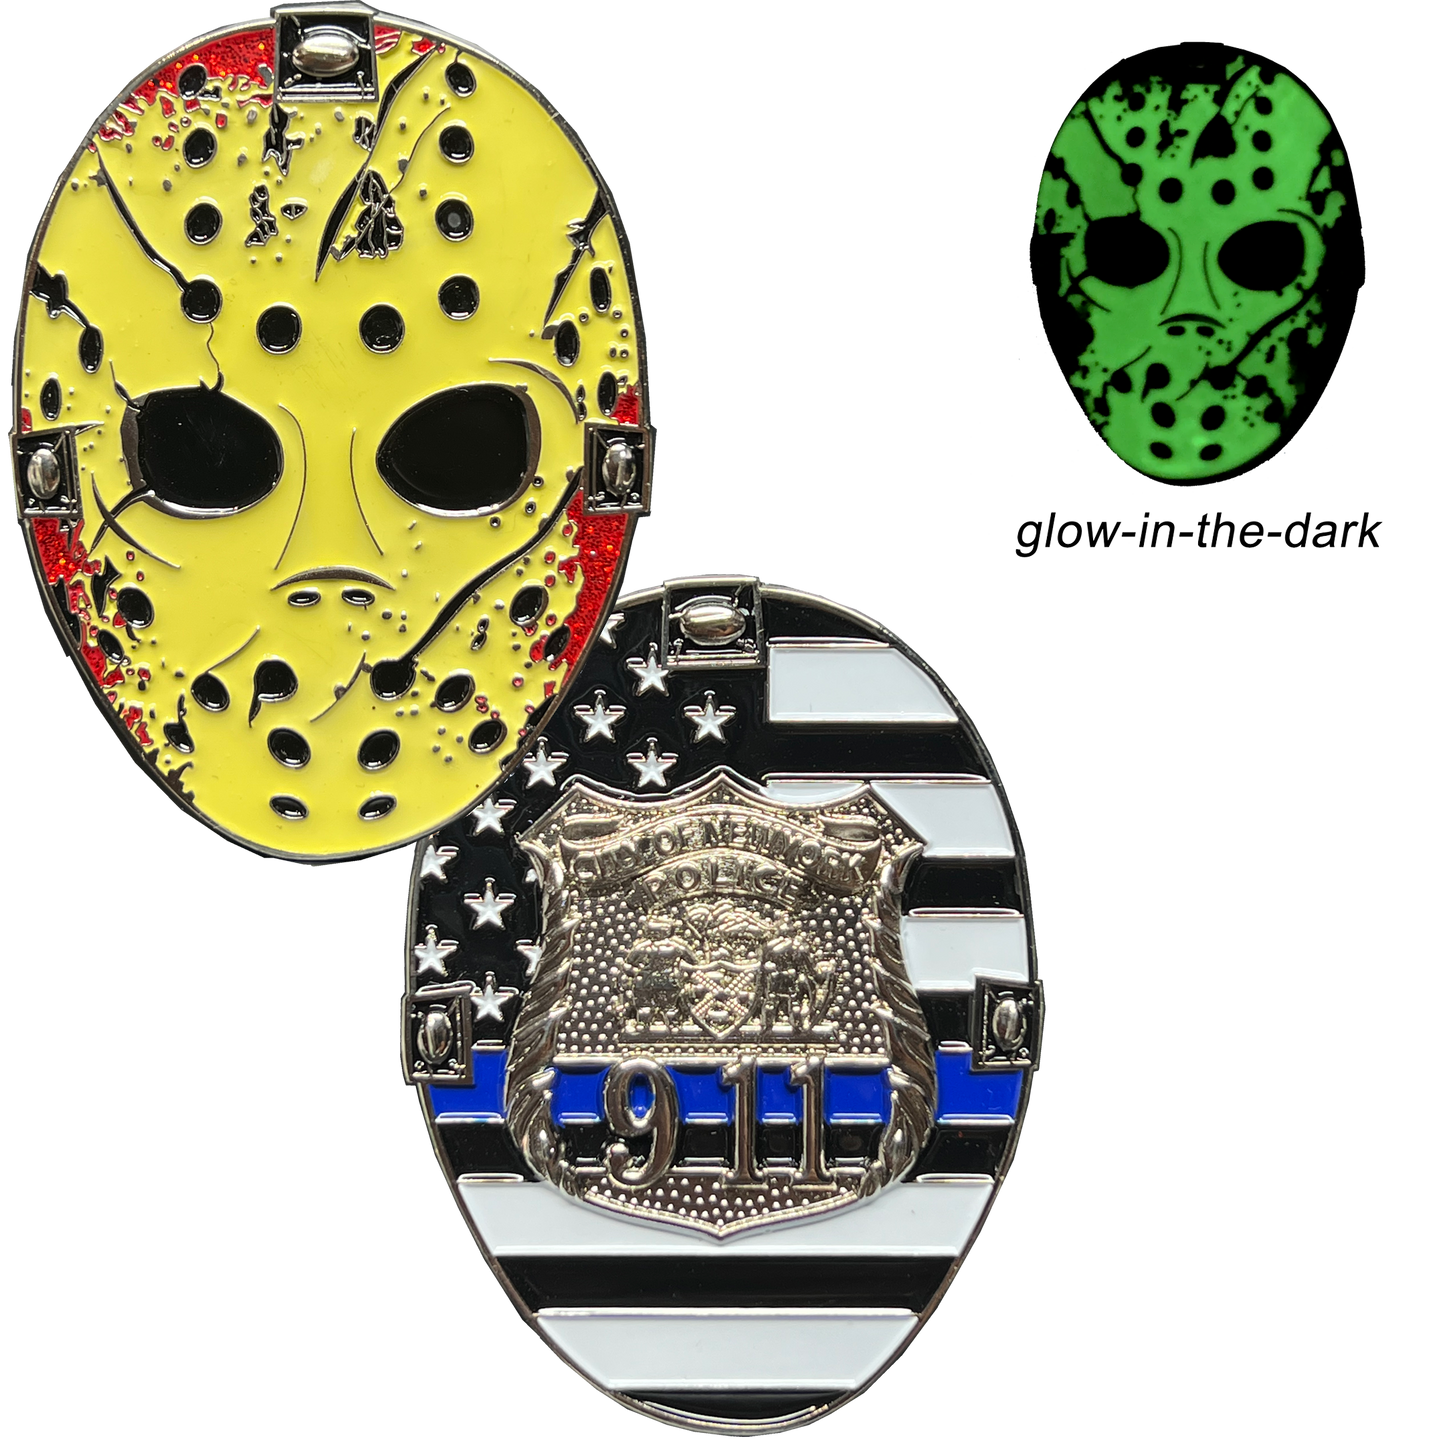 EL11-006 New York City Police Officer Jason Voorhees Challenge Coin Friday the 13th Movie Poster NYPD